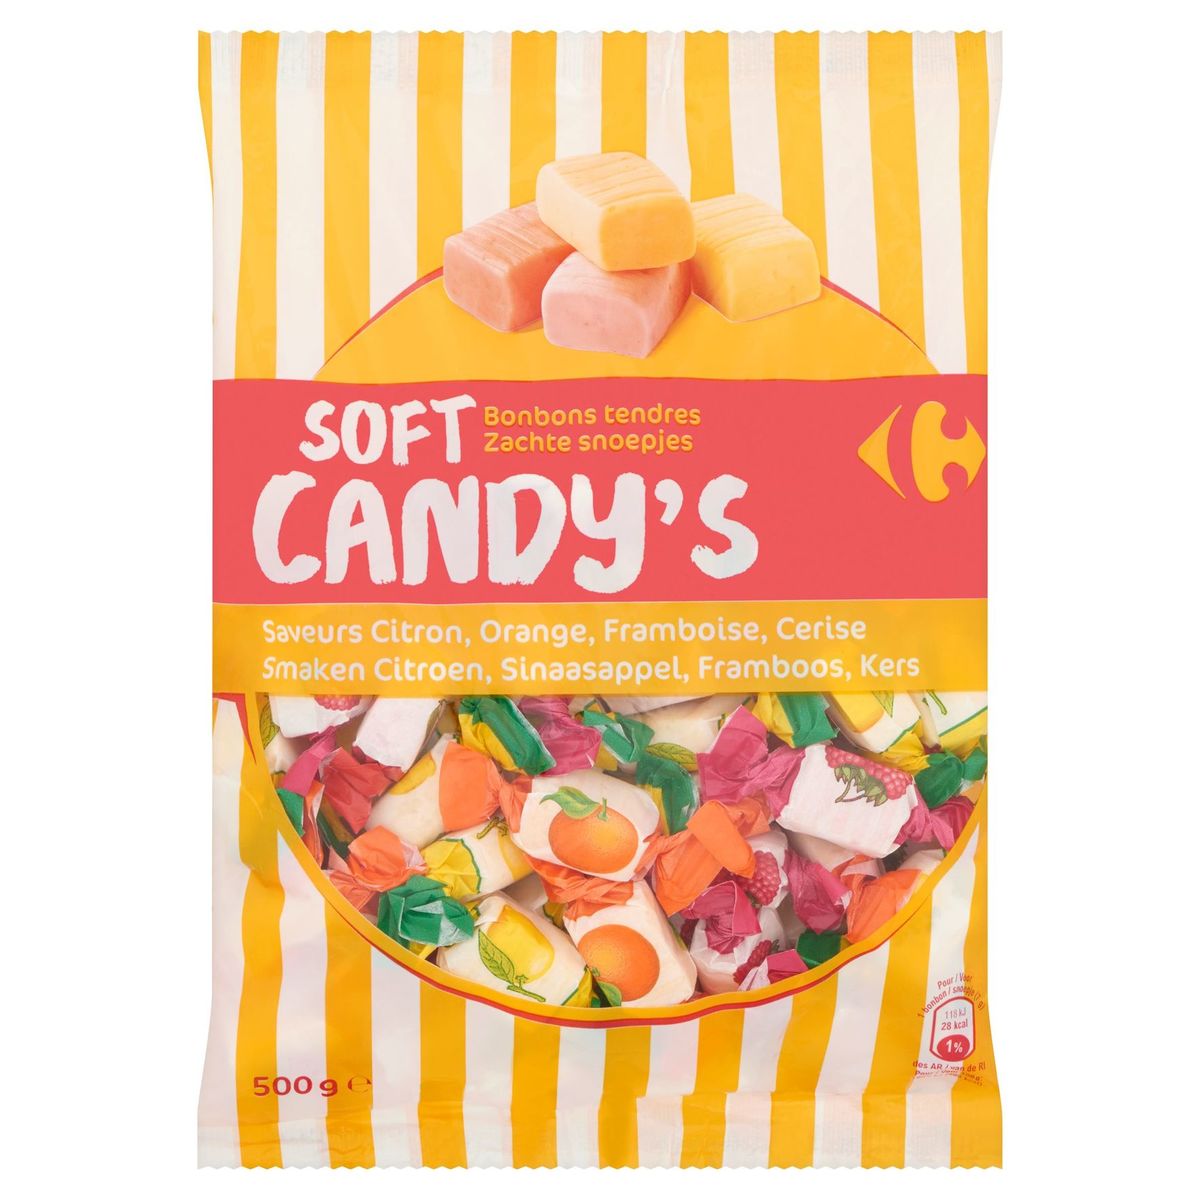 Carrefour Soft Candy's Bonbons Tendres 500 g